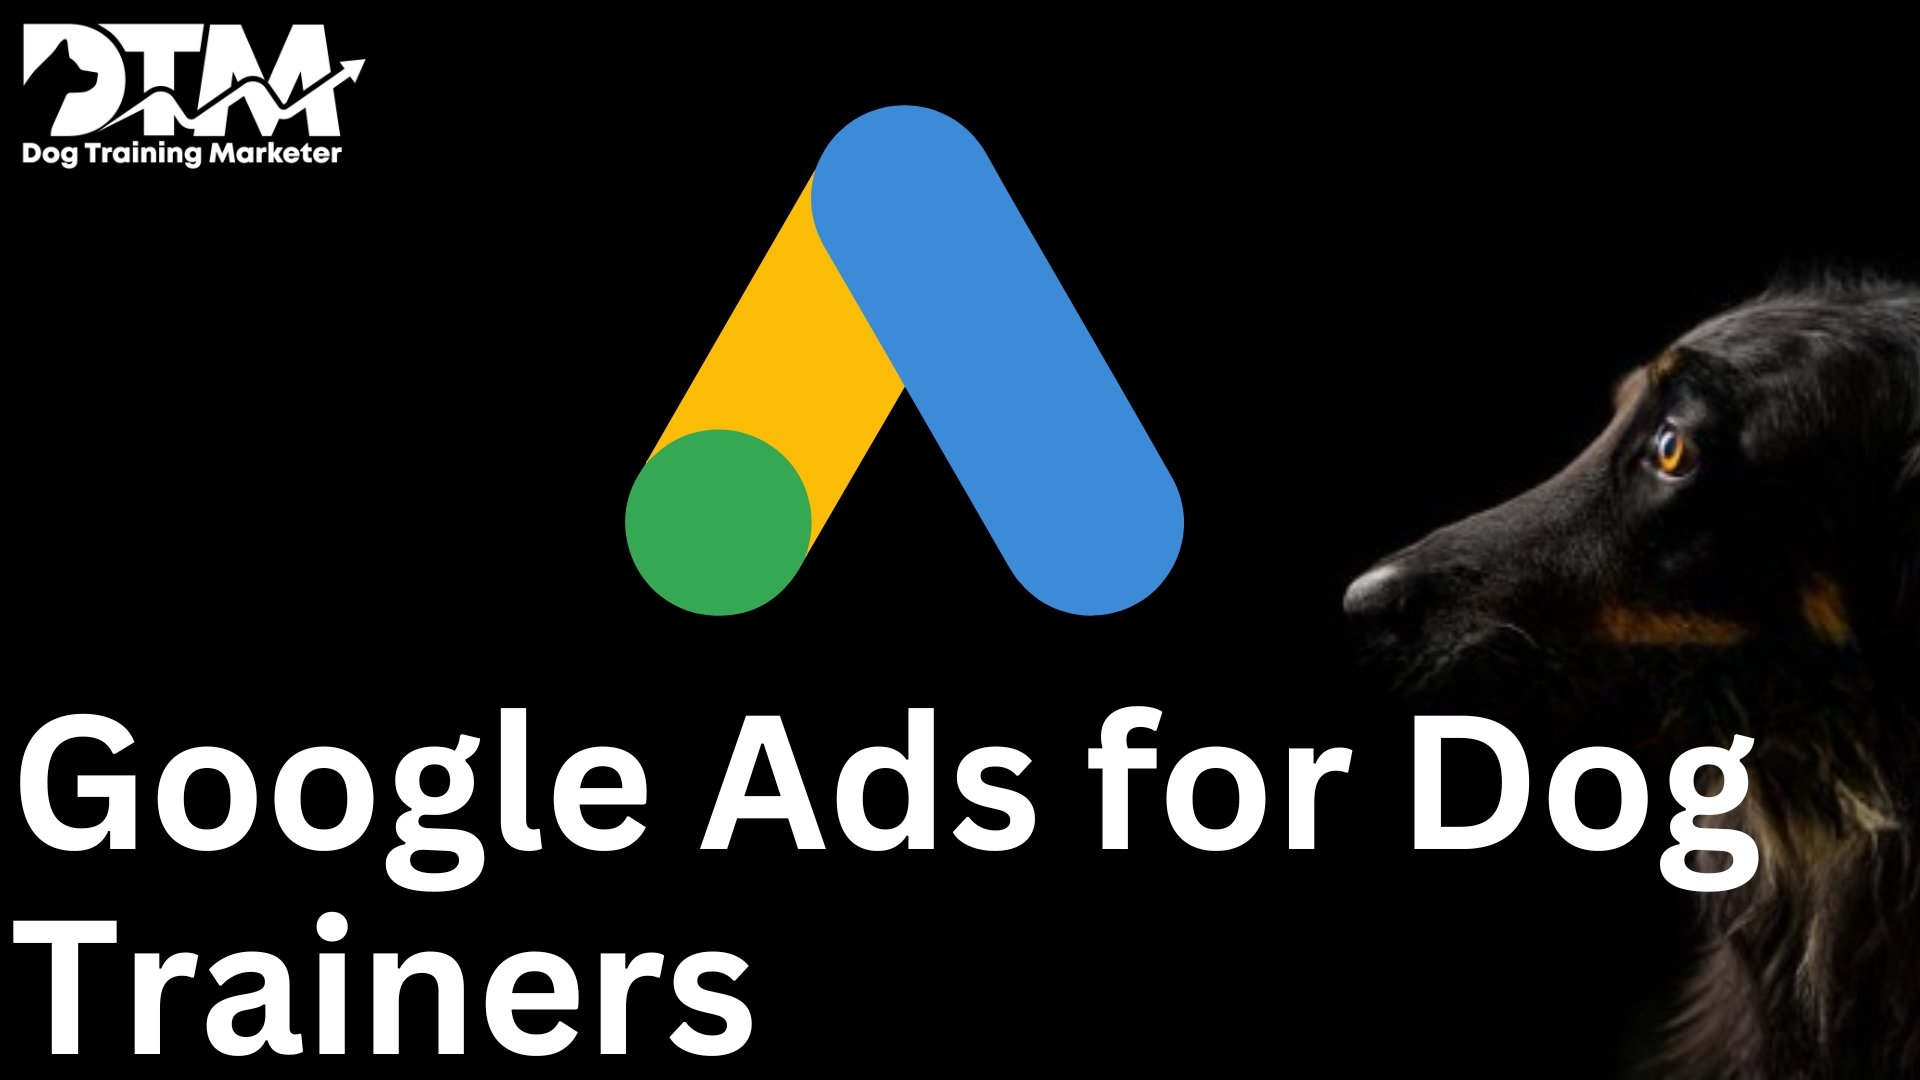 Google Ads for Dog Trainers